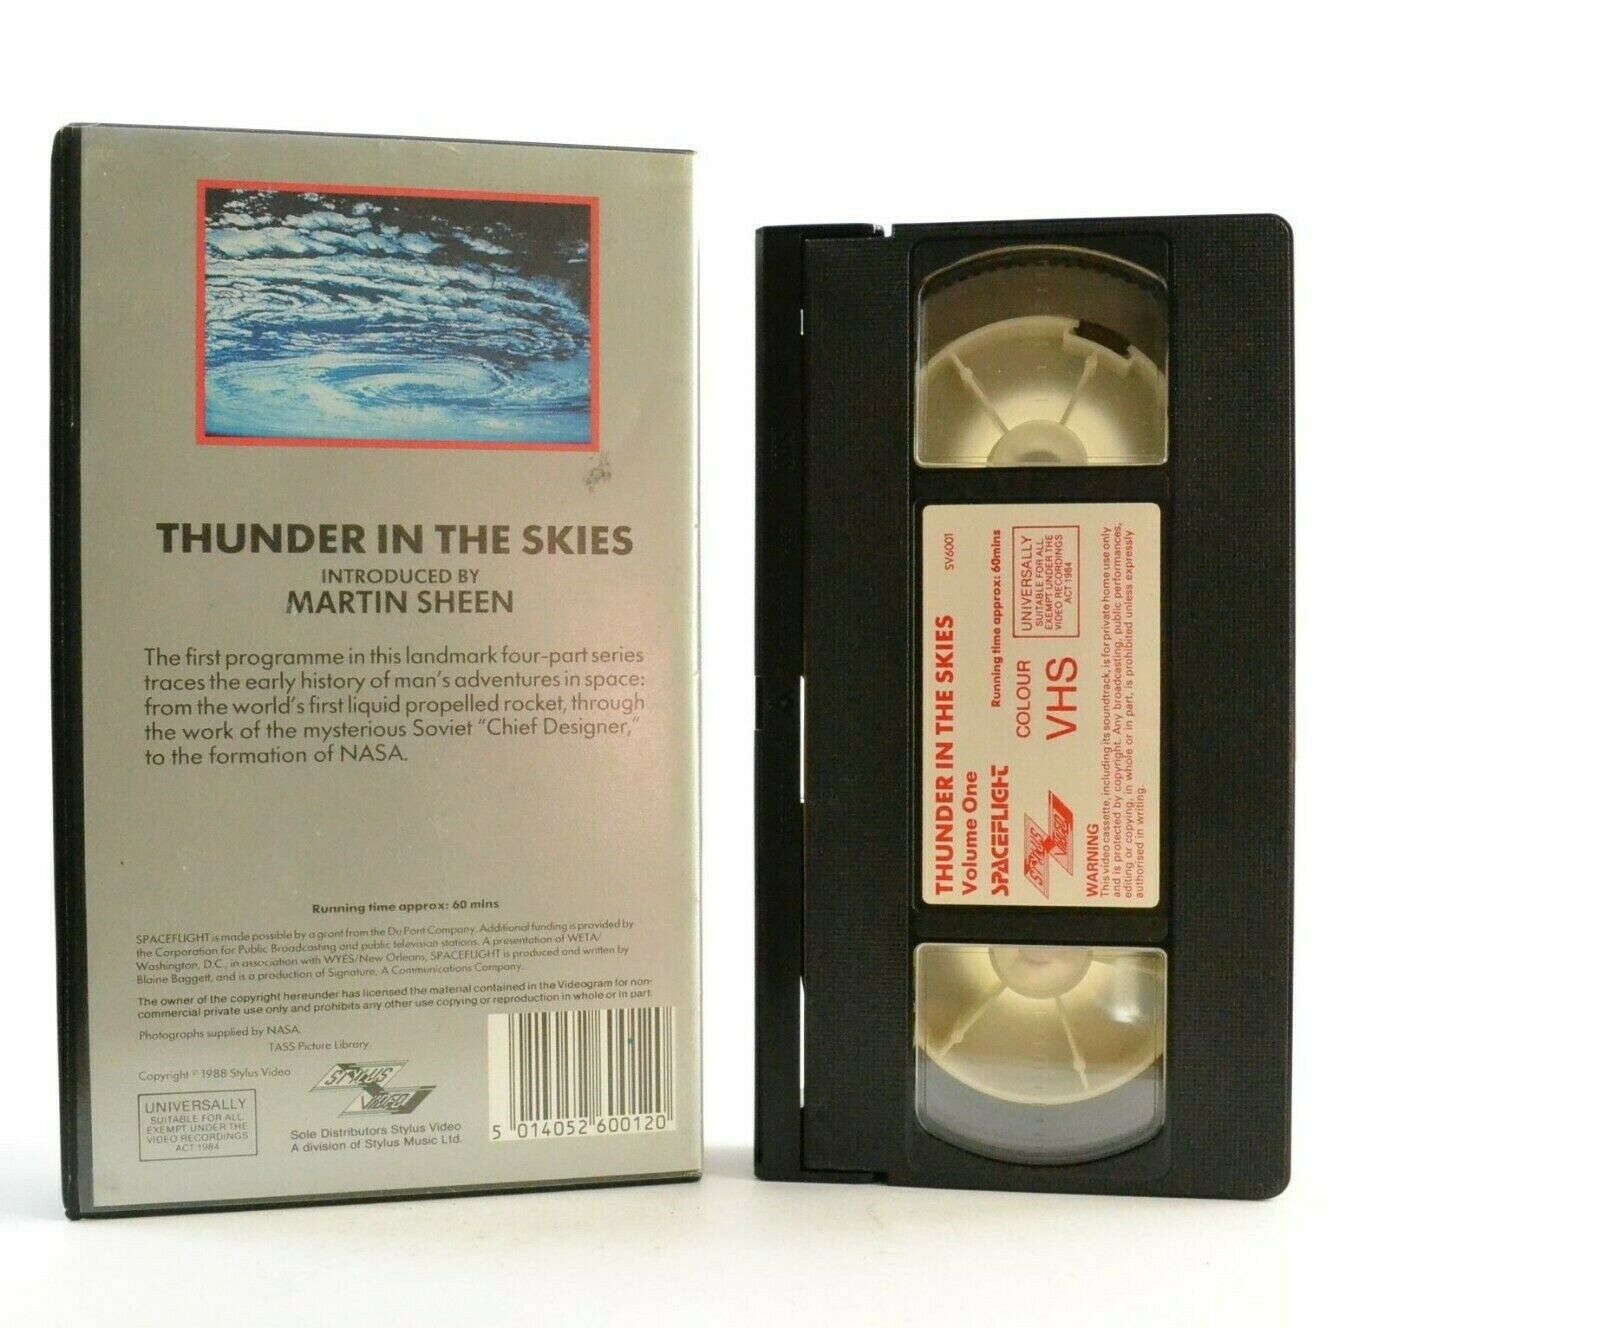 Spaceflight, Vol.One: Thunder In The Skies - Introduced By Martin Sheen - VHS-